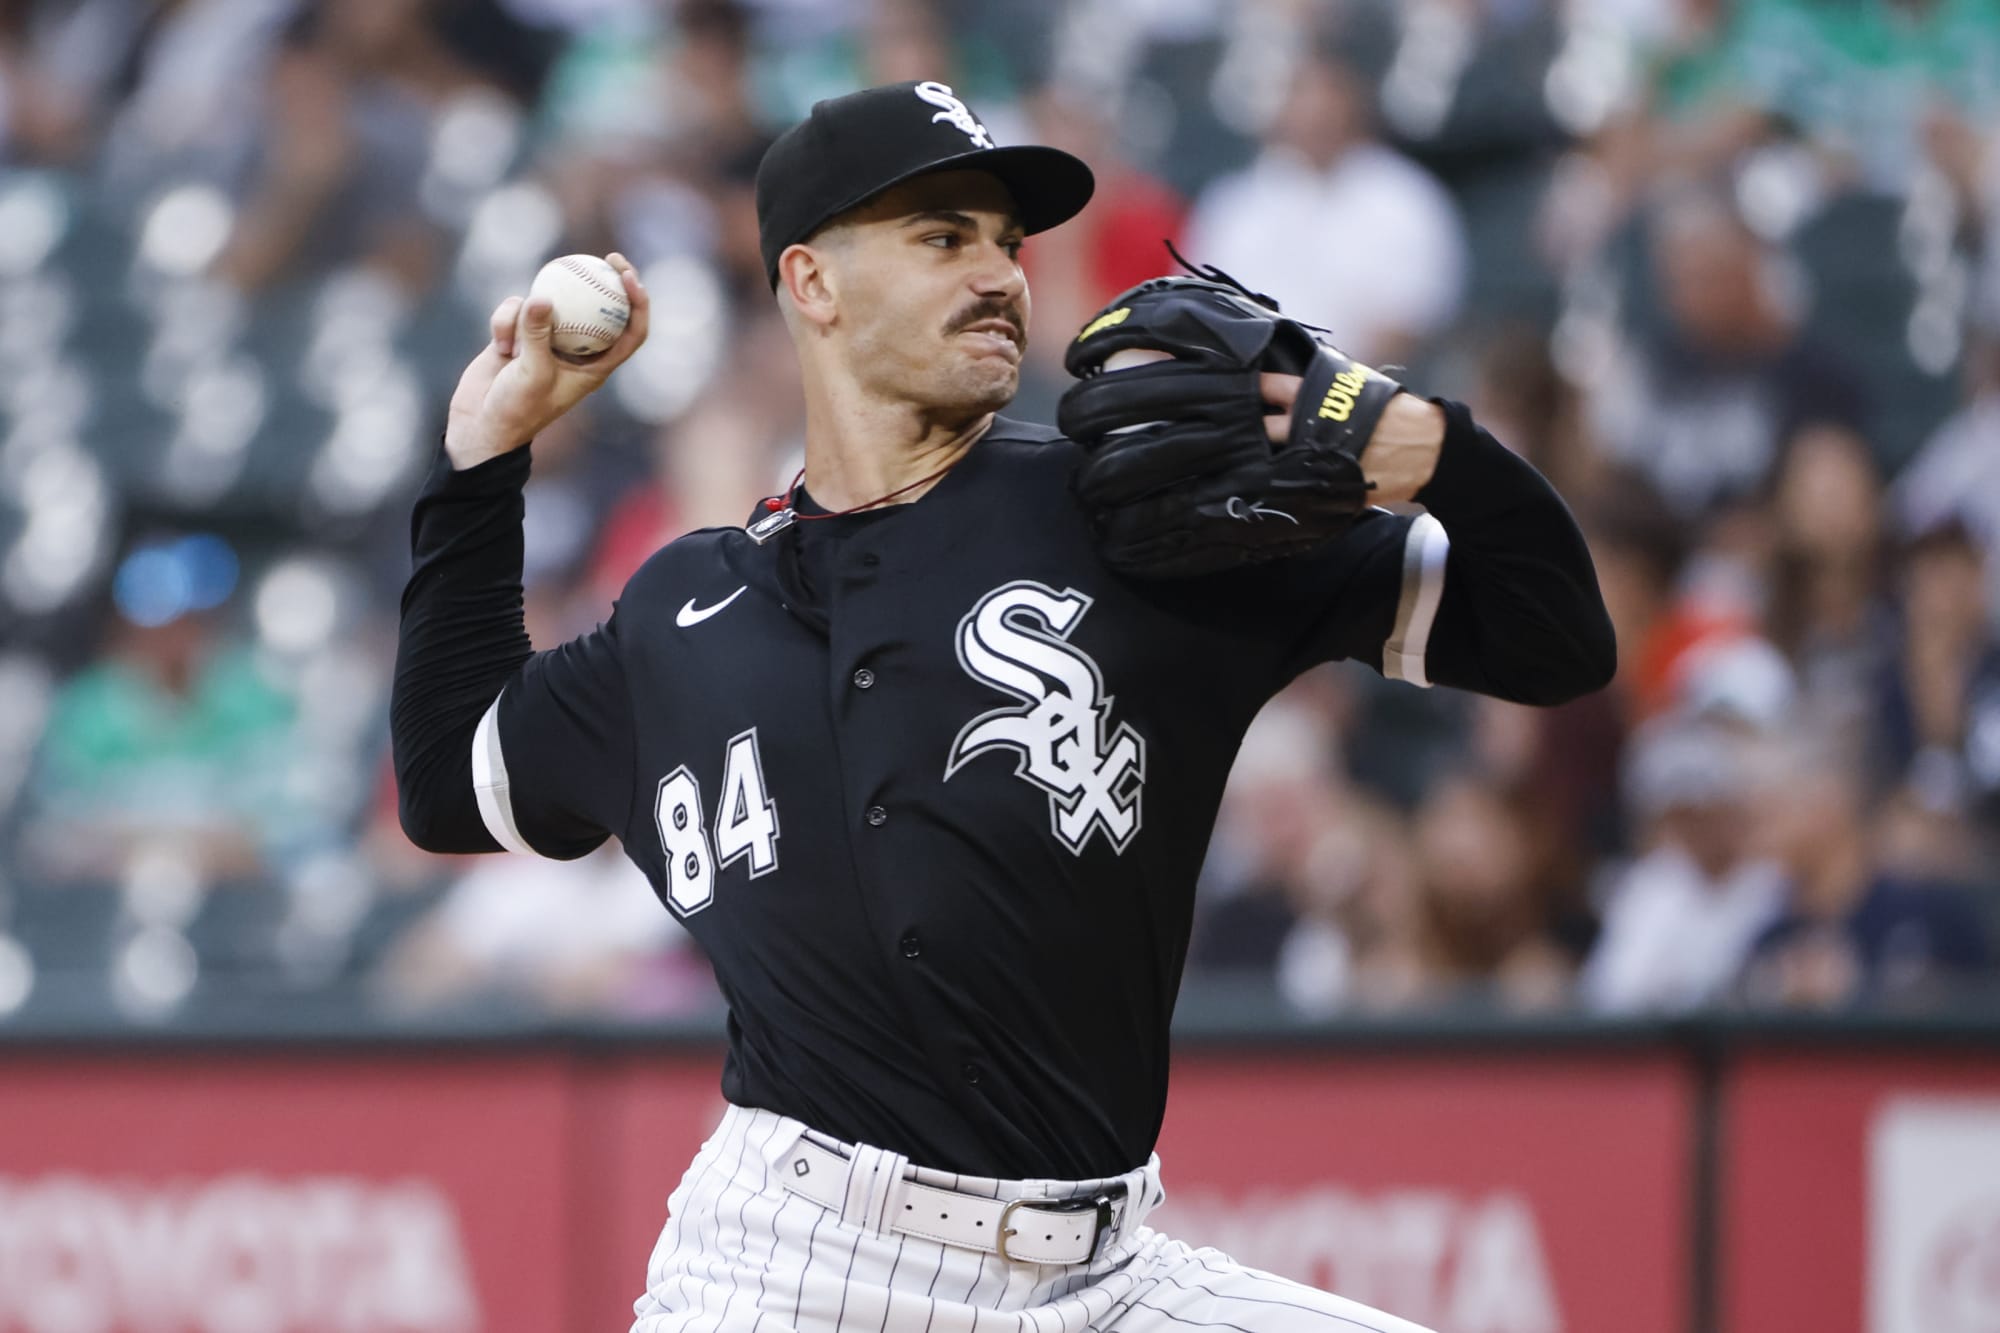 Chicago White Sox pitcher Dylan Cease should win the AL Cy Young